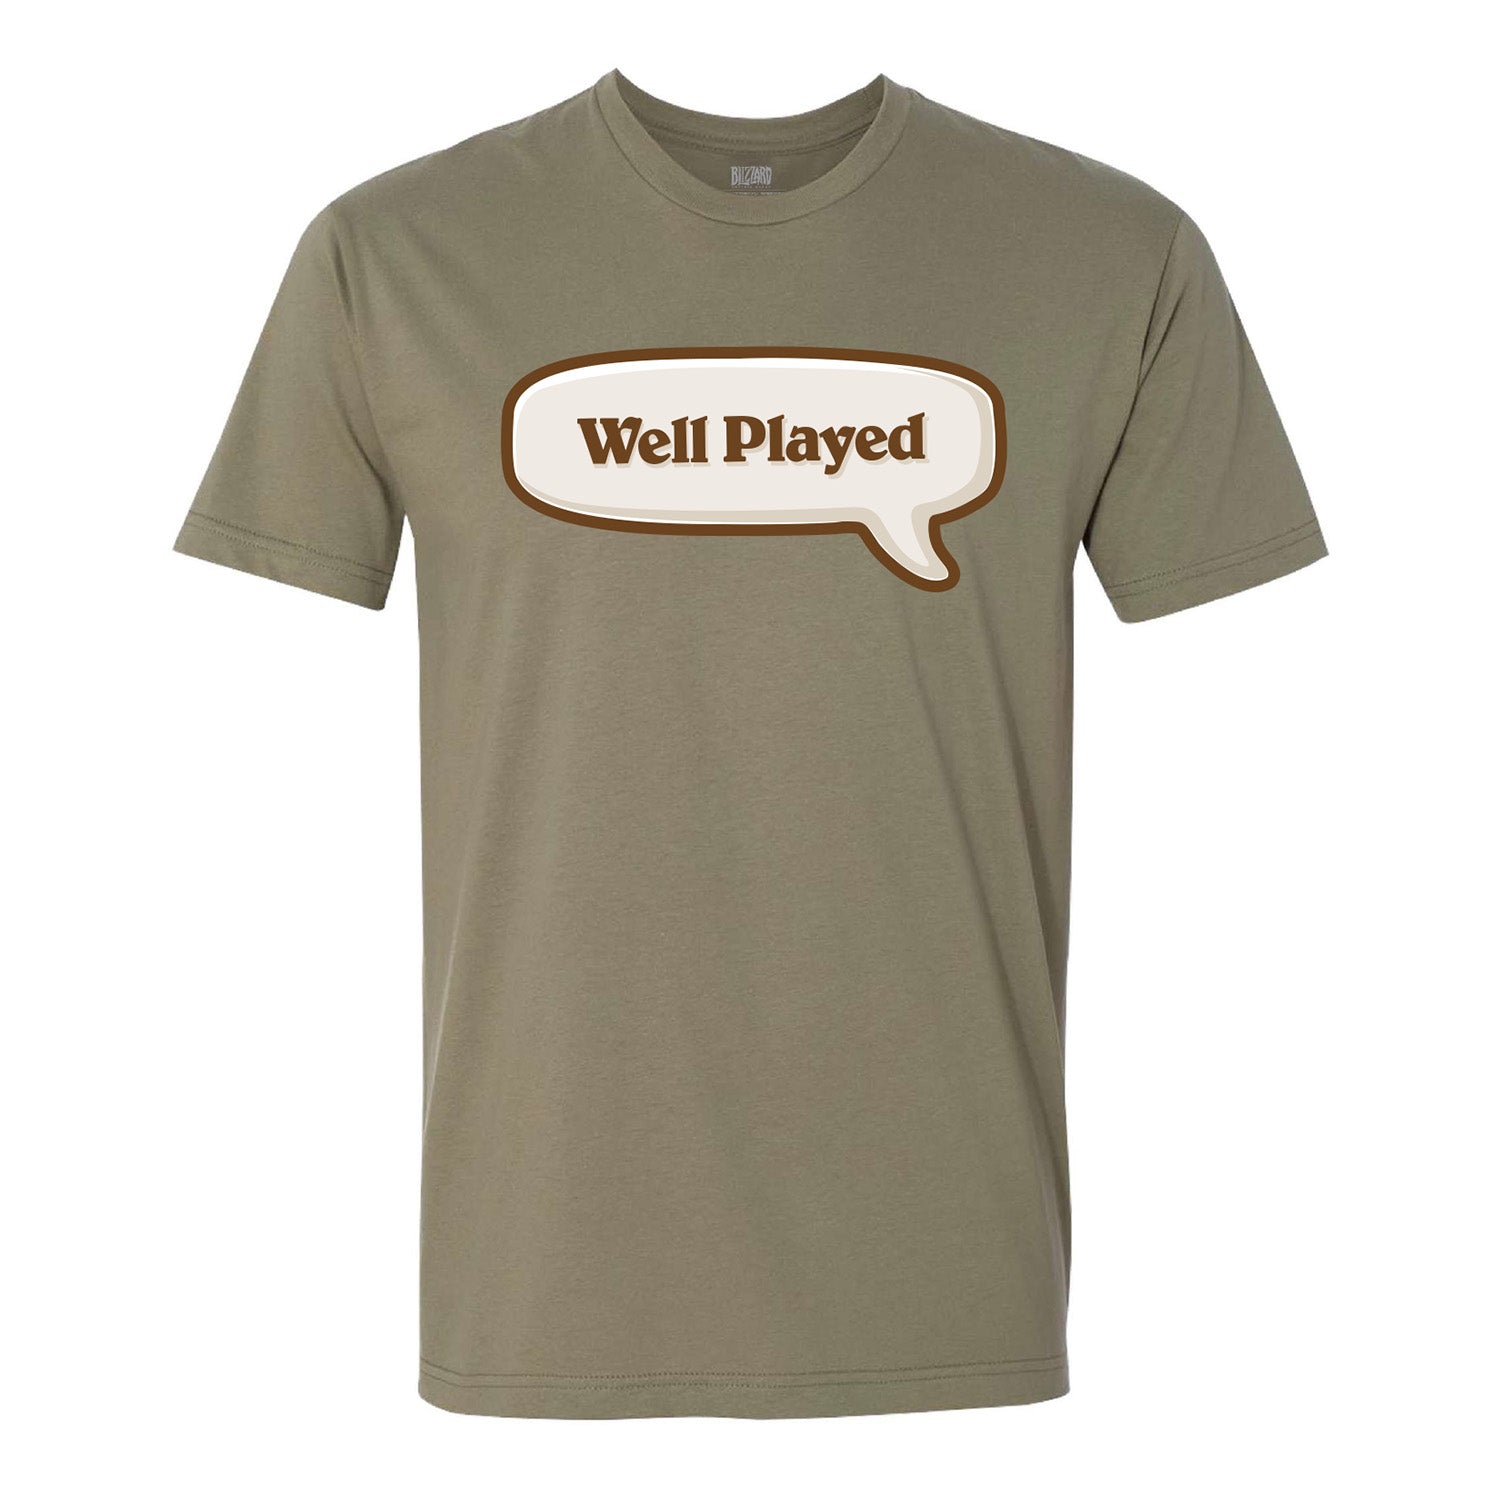 Hearthstone Well Played T-Shirt - Front View Olive Green Version